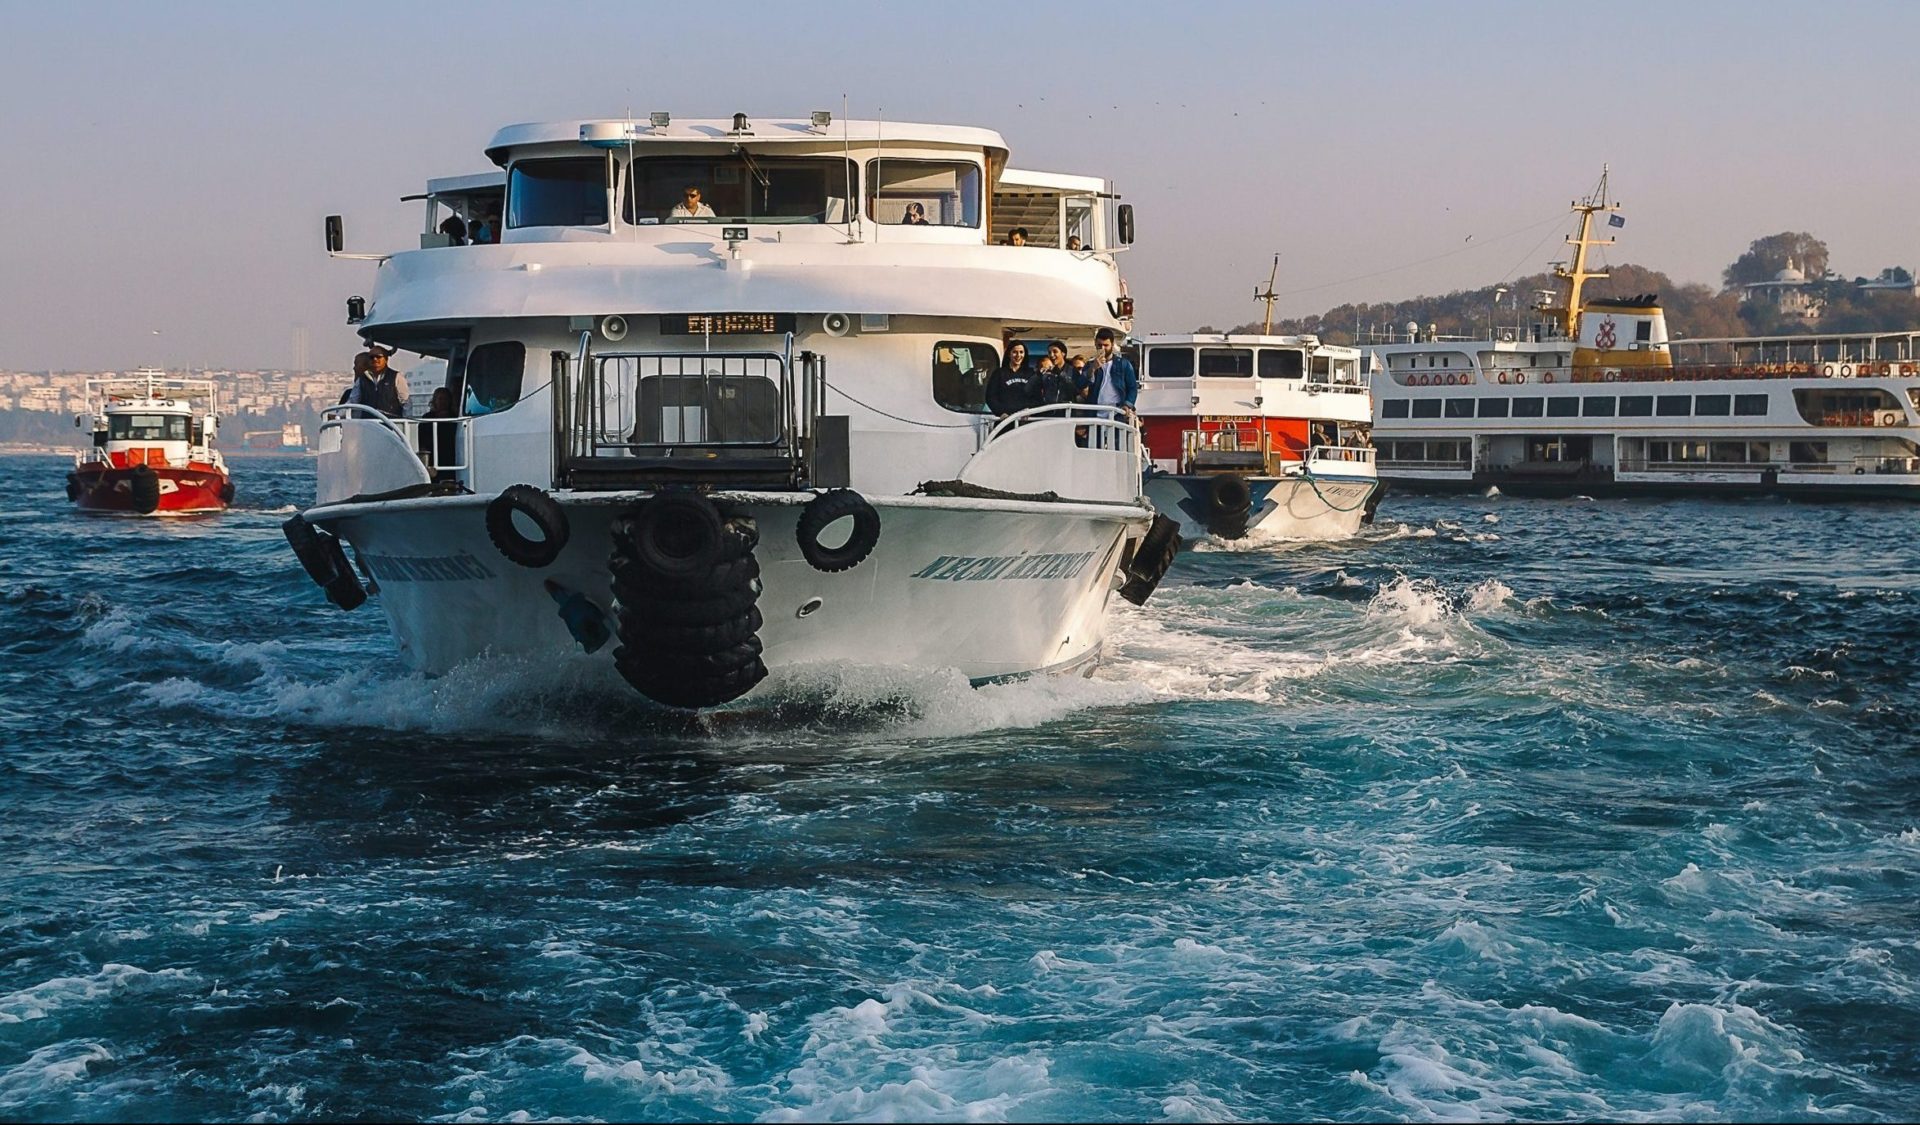 Expansion of Perth ferries services to increase city connection